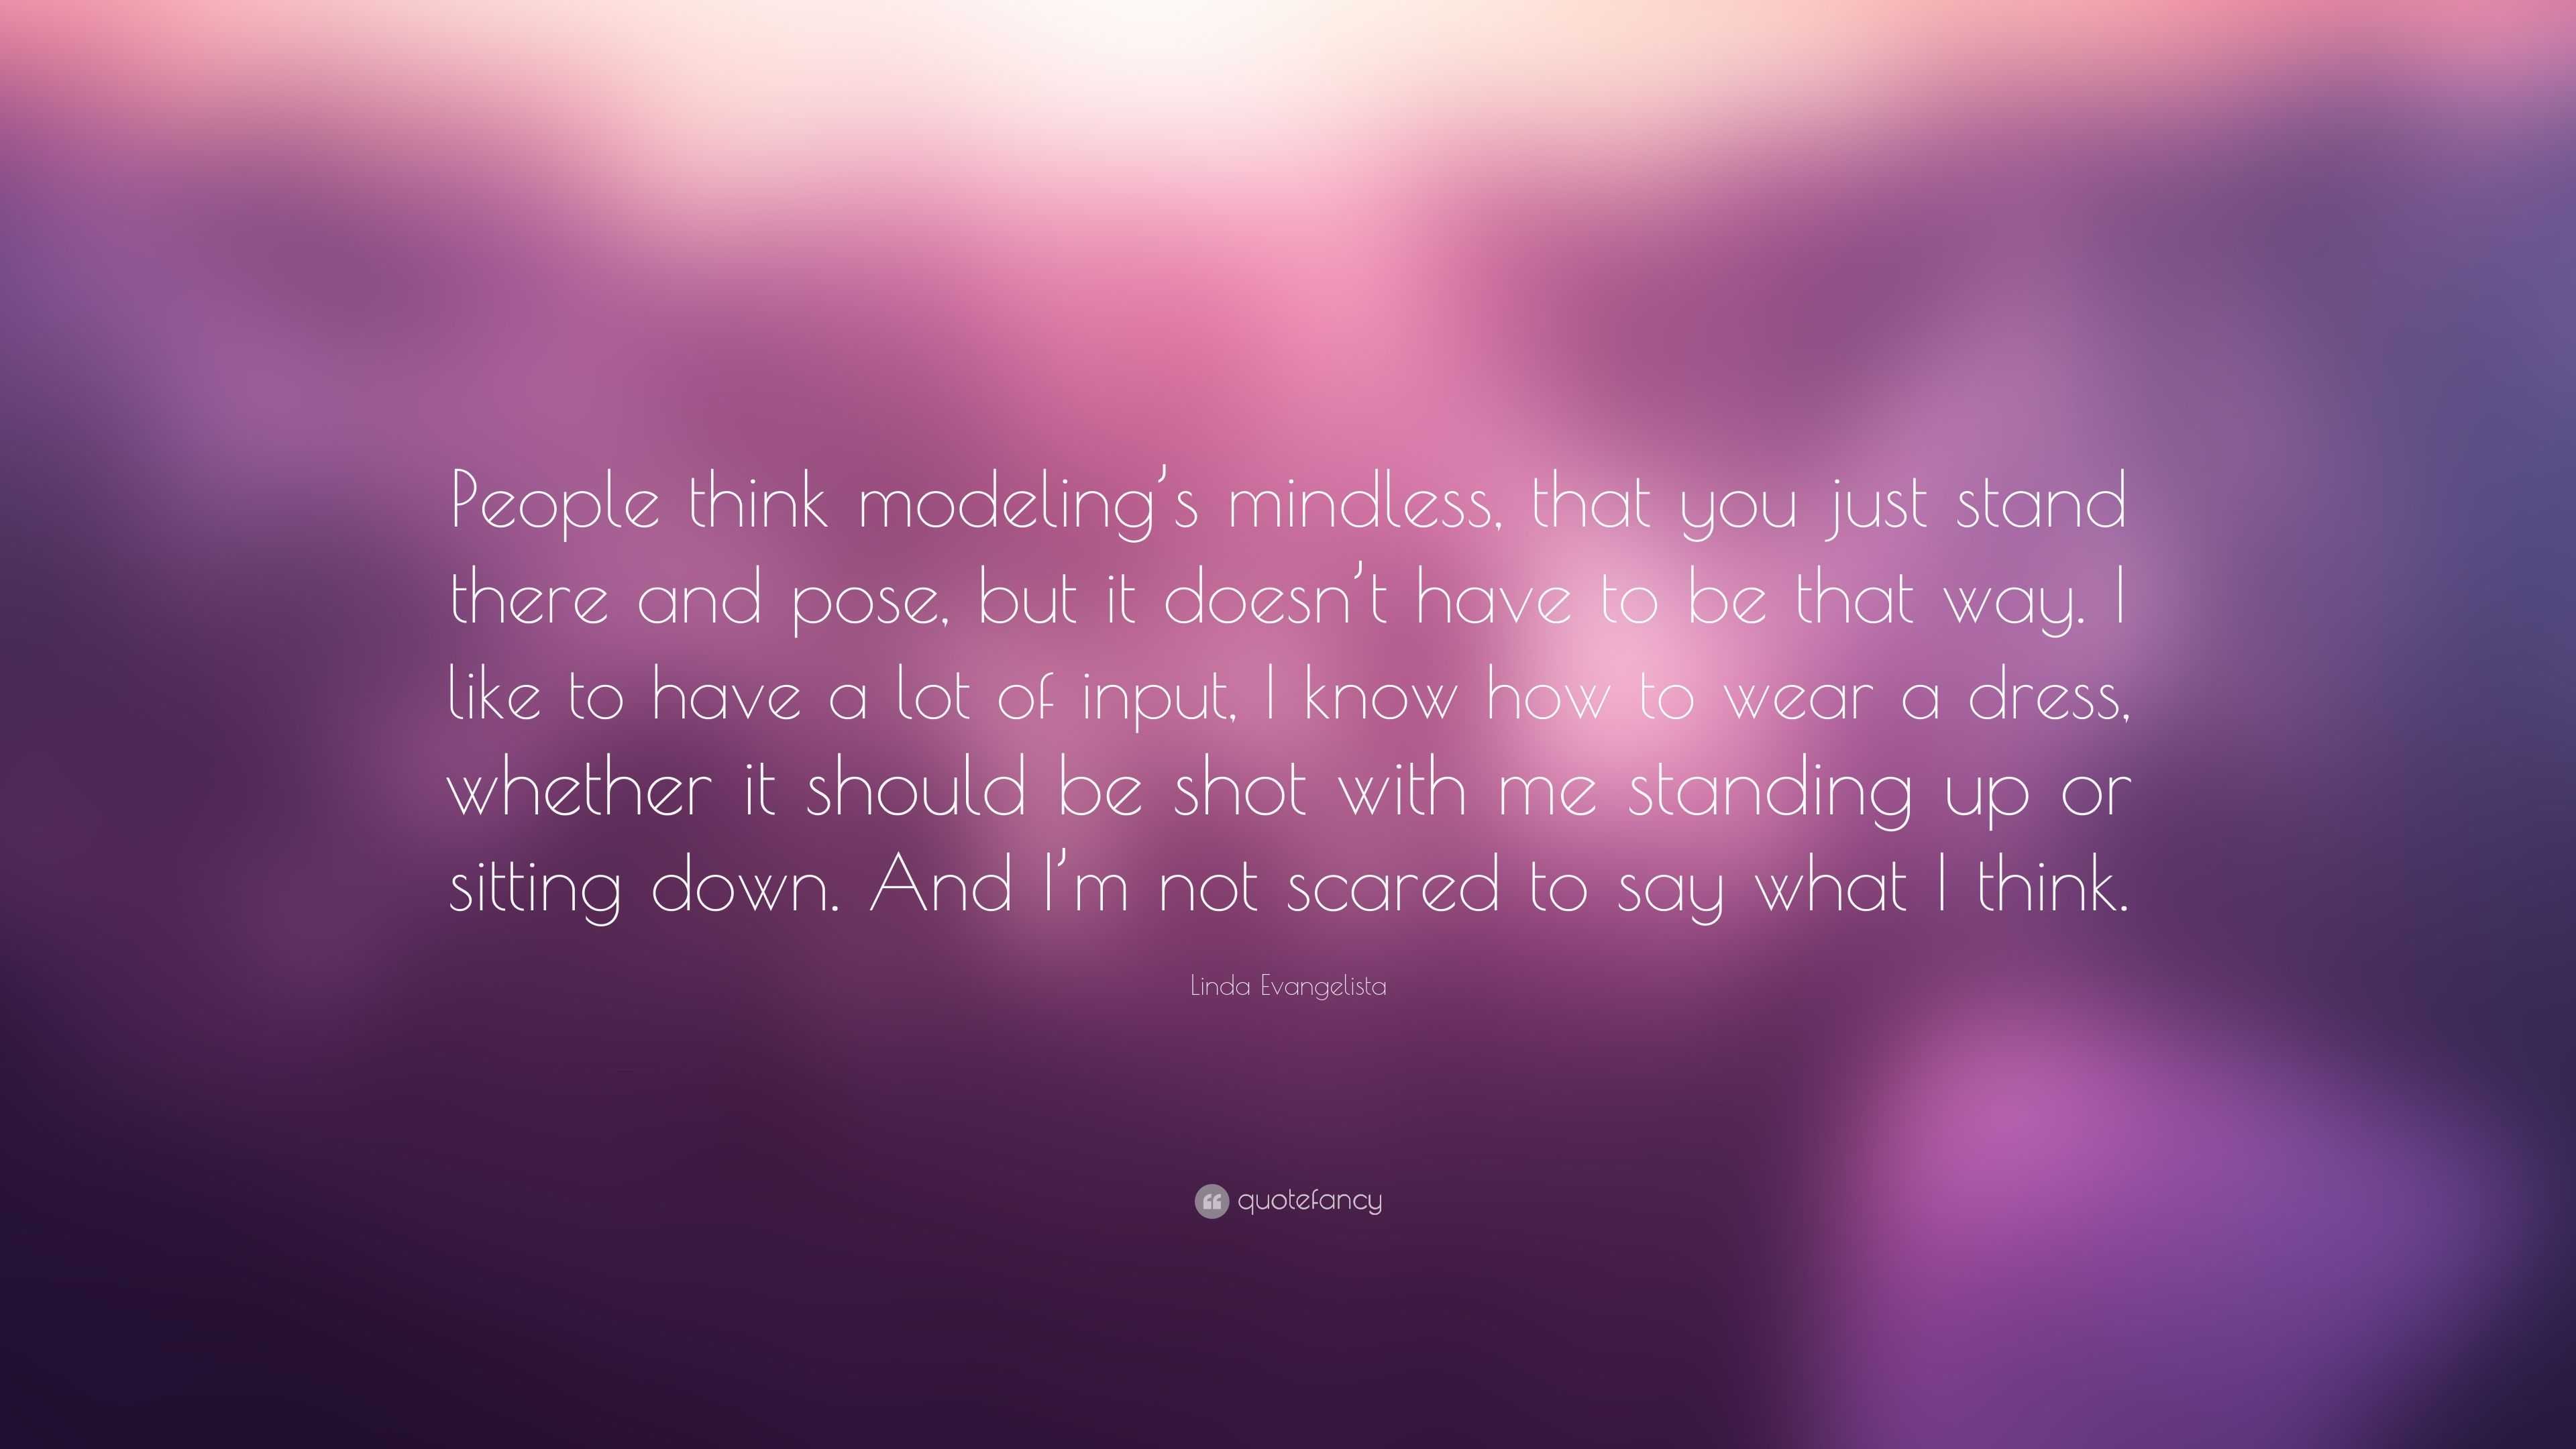 Linda Evangelista Quote: “People think modeling’s mindless, that you ...